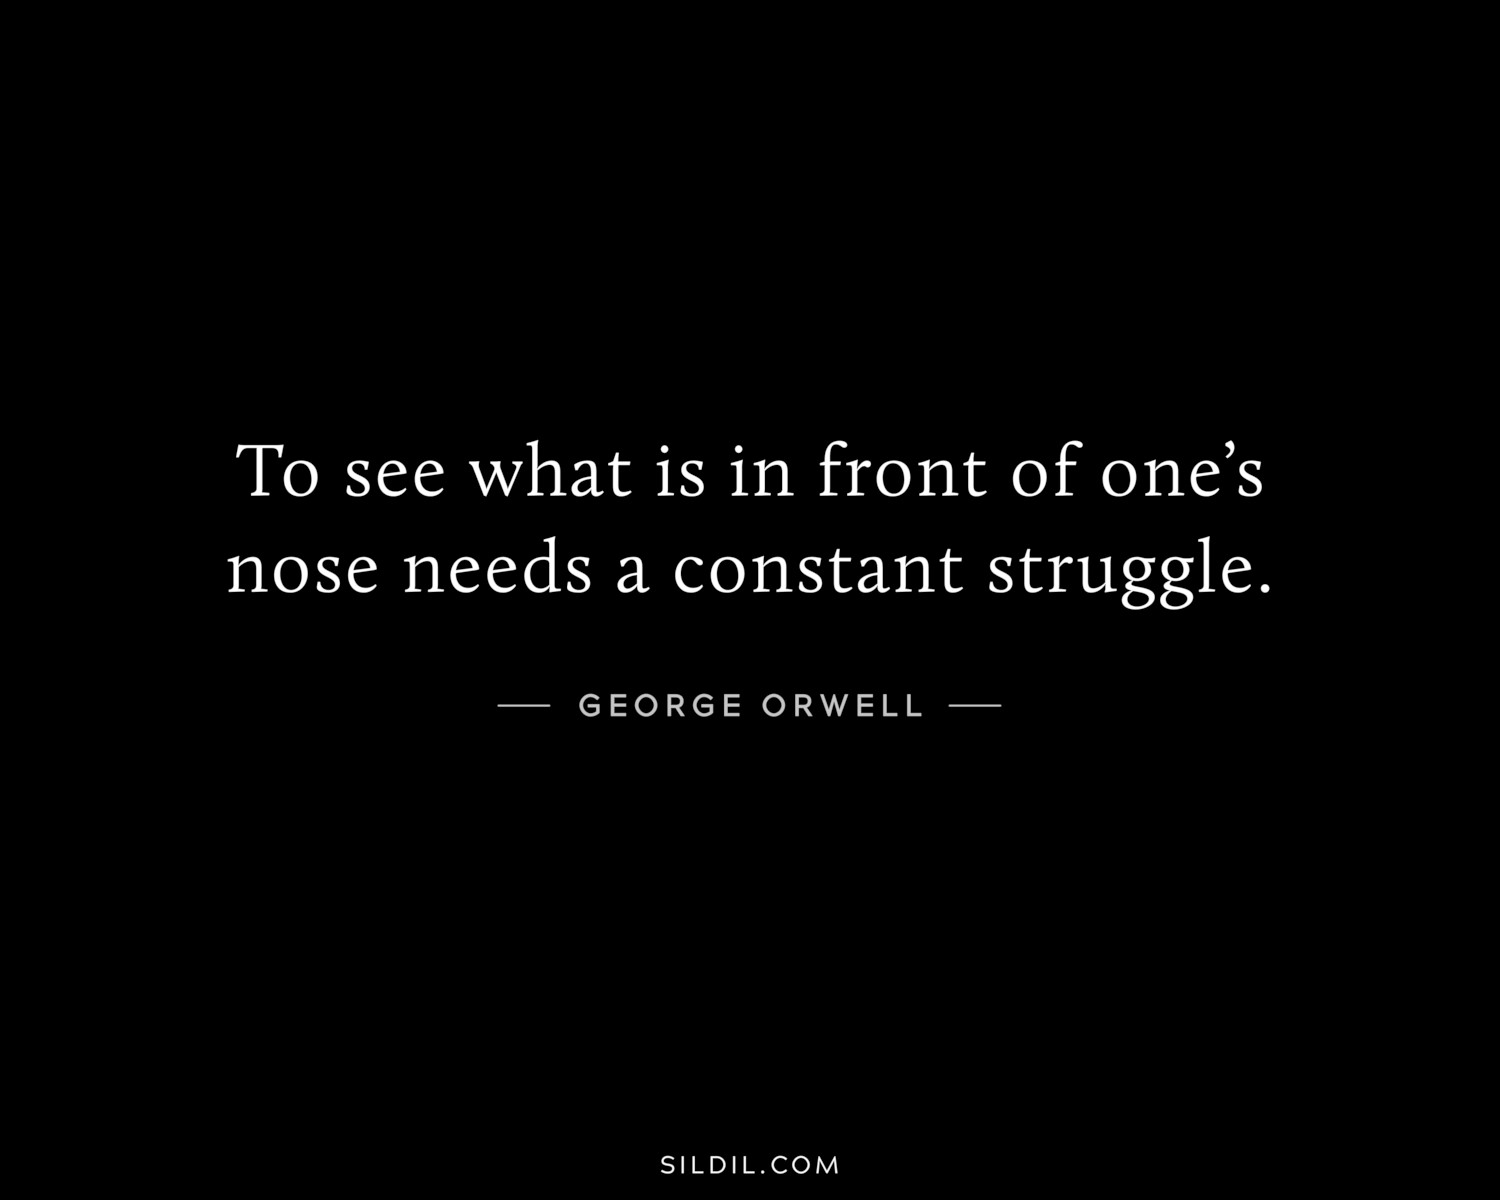 To see what is in front of one’s nose needs a constant struggle.